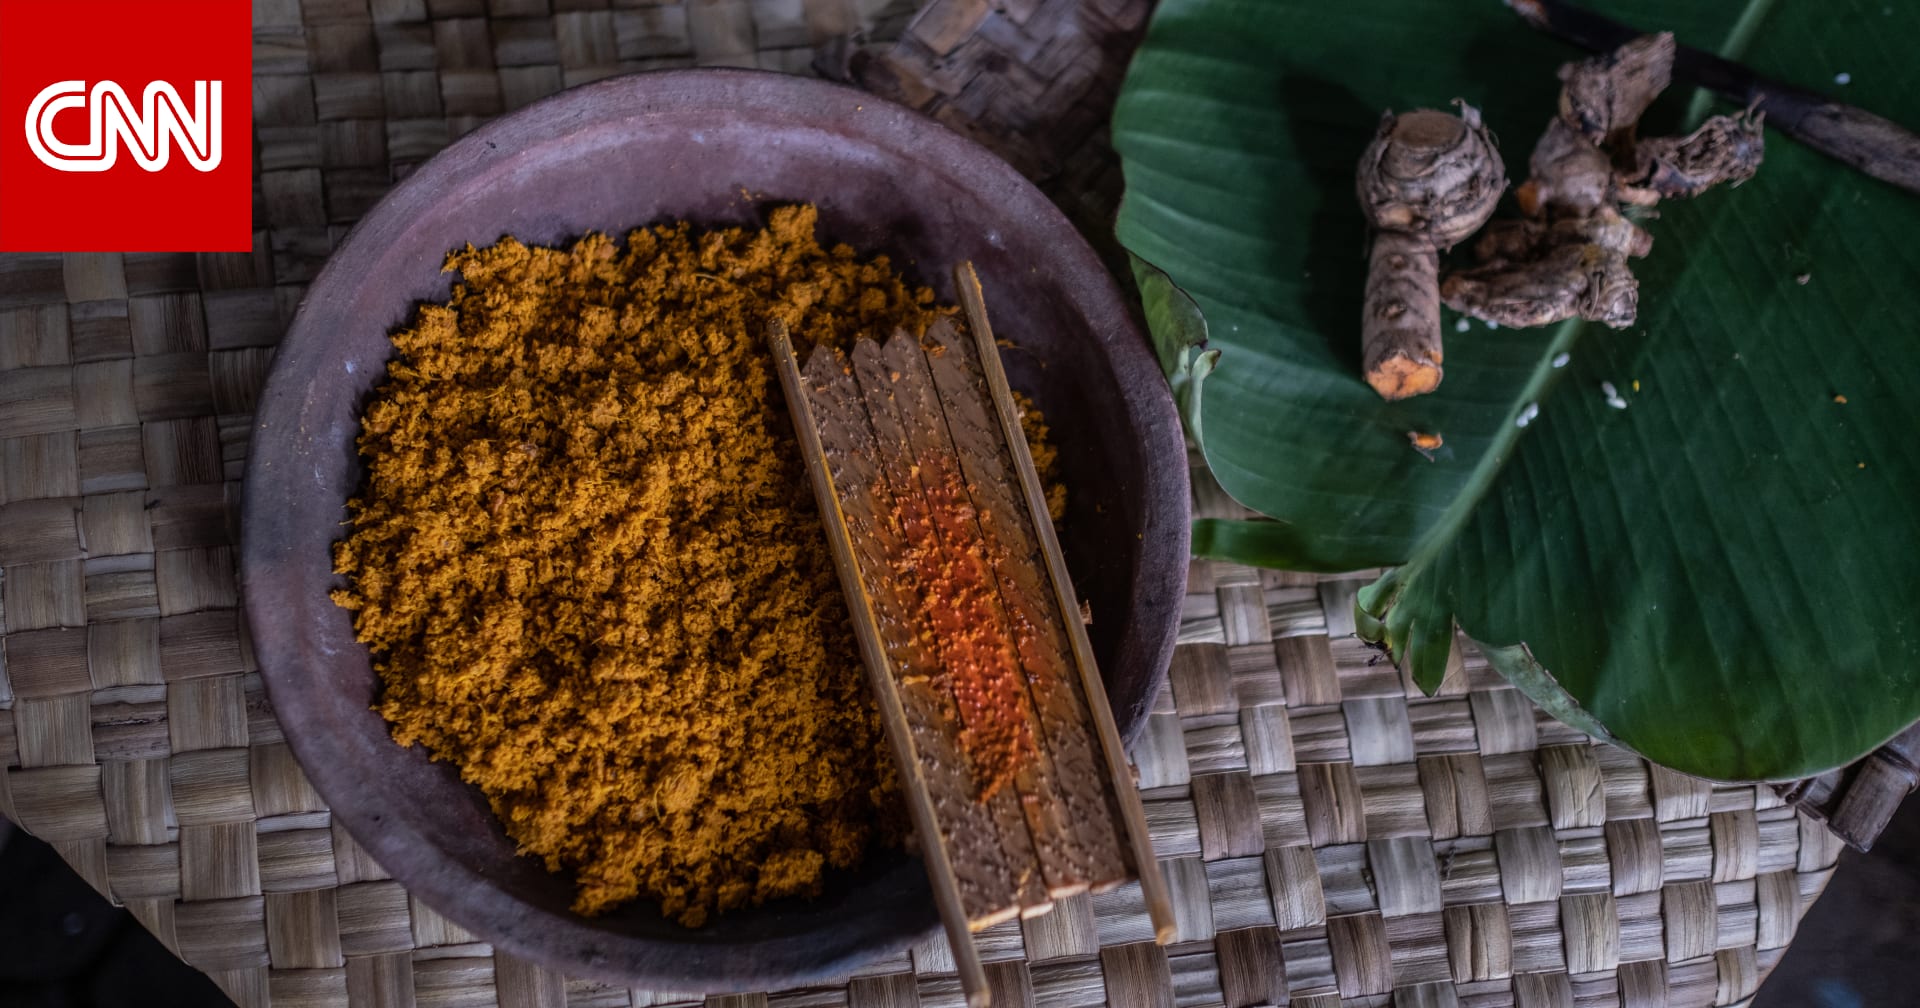 Turmeric…what are its benefits and who should avoid using it?